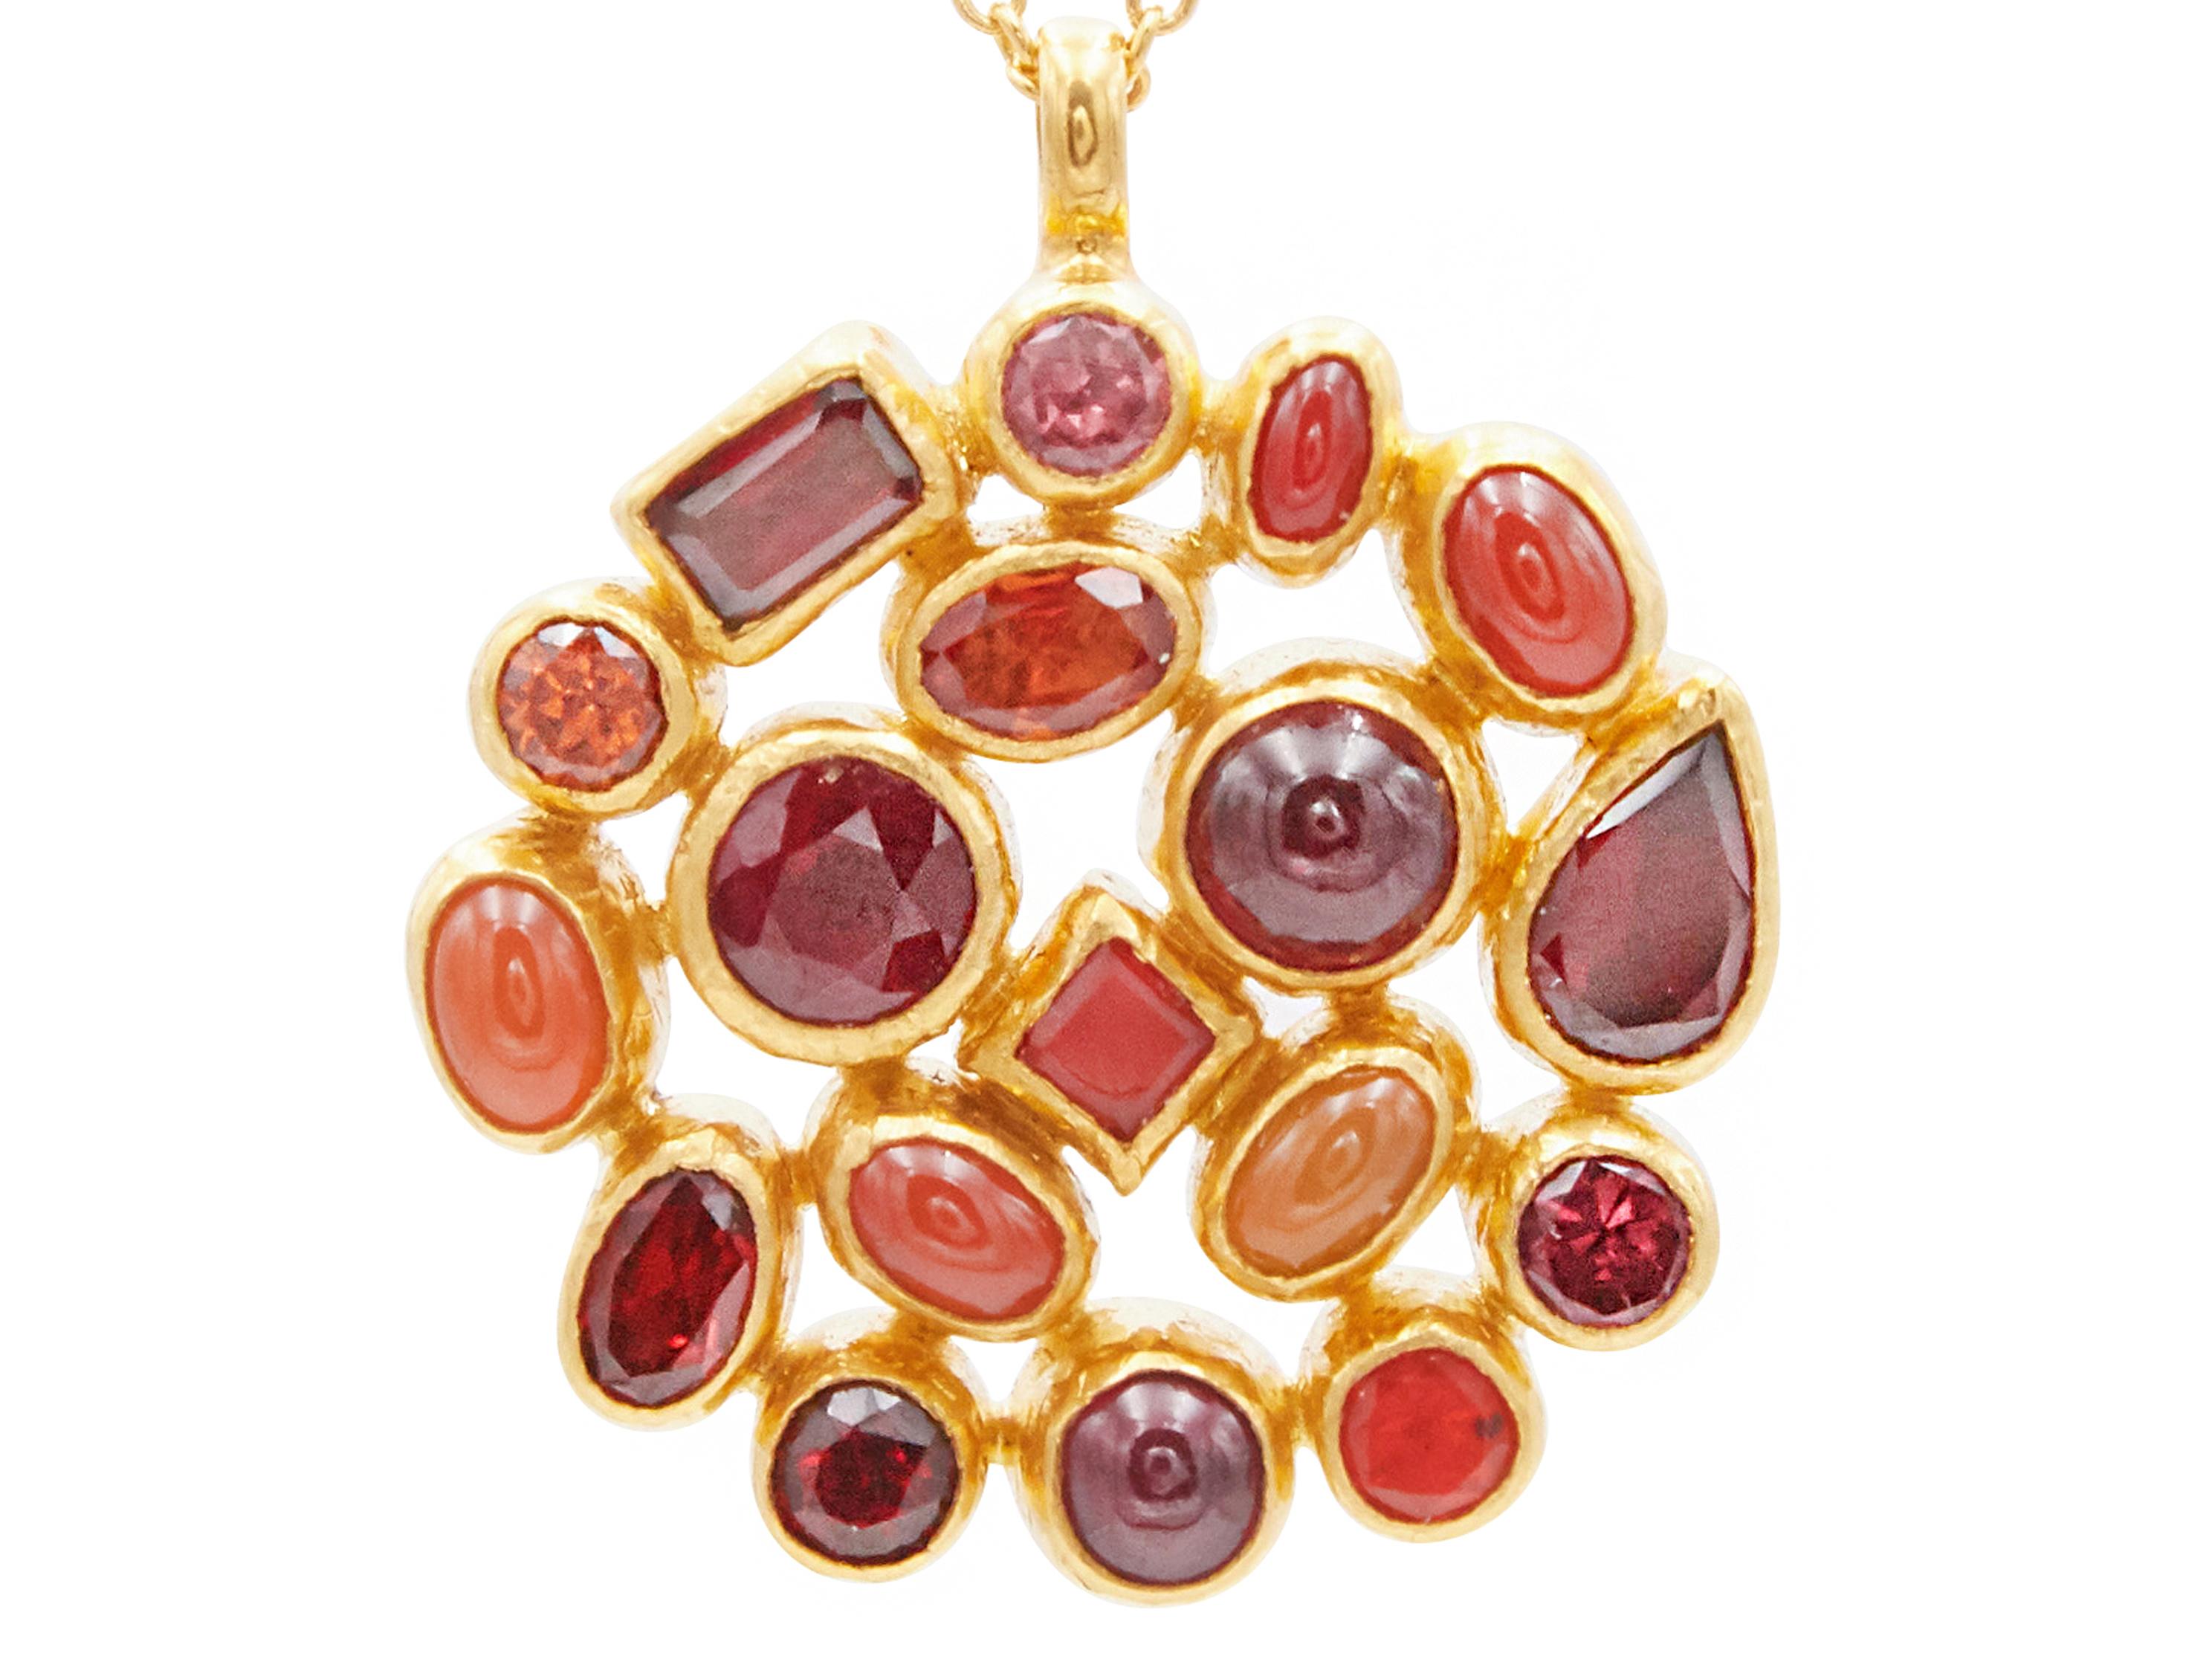 GURHAN one-of-a-kind pendant necklace set in 24 Karat hammered yellow gold featuring (18) mixed sized and shaped cabochon and faceted stones; (3) Rubies 4.93cts., (4) Red Garnets 2.49cts., (2) Rhodolite Garnets 0.62cts., (1) Fancy Sapphire 0.52cts.,